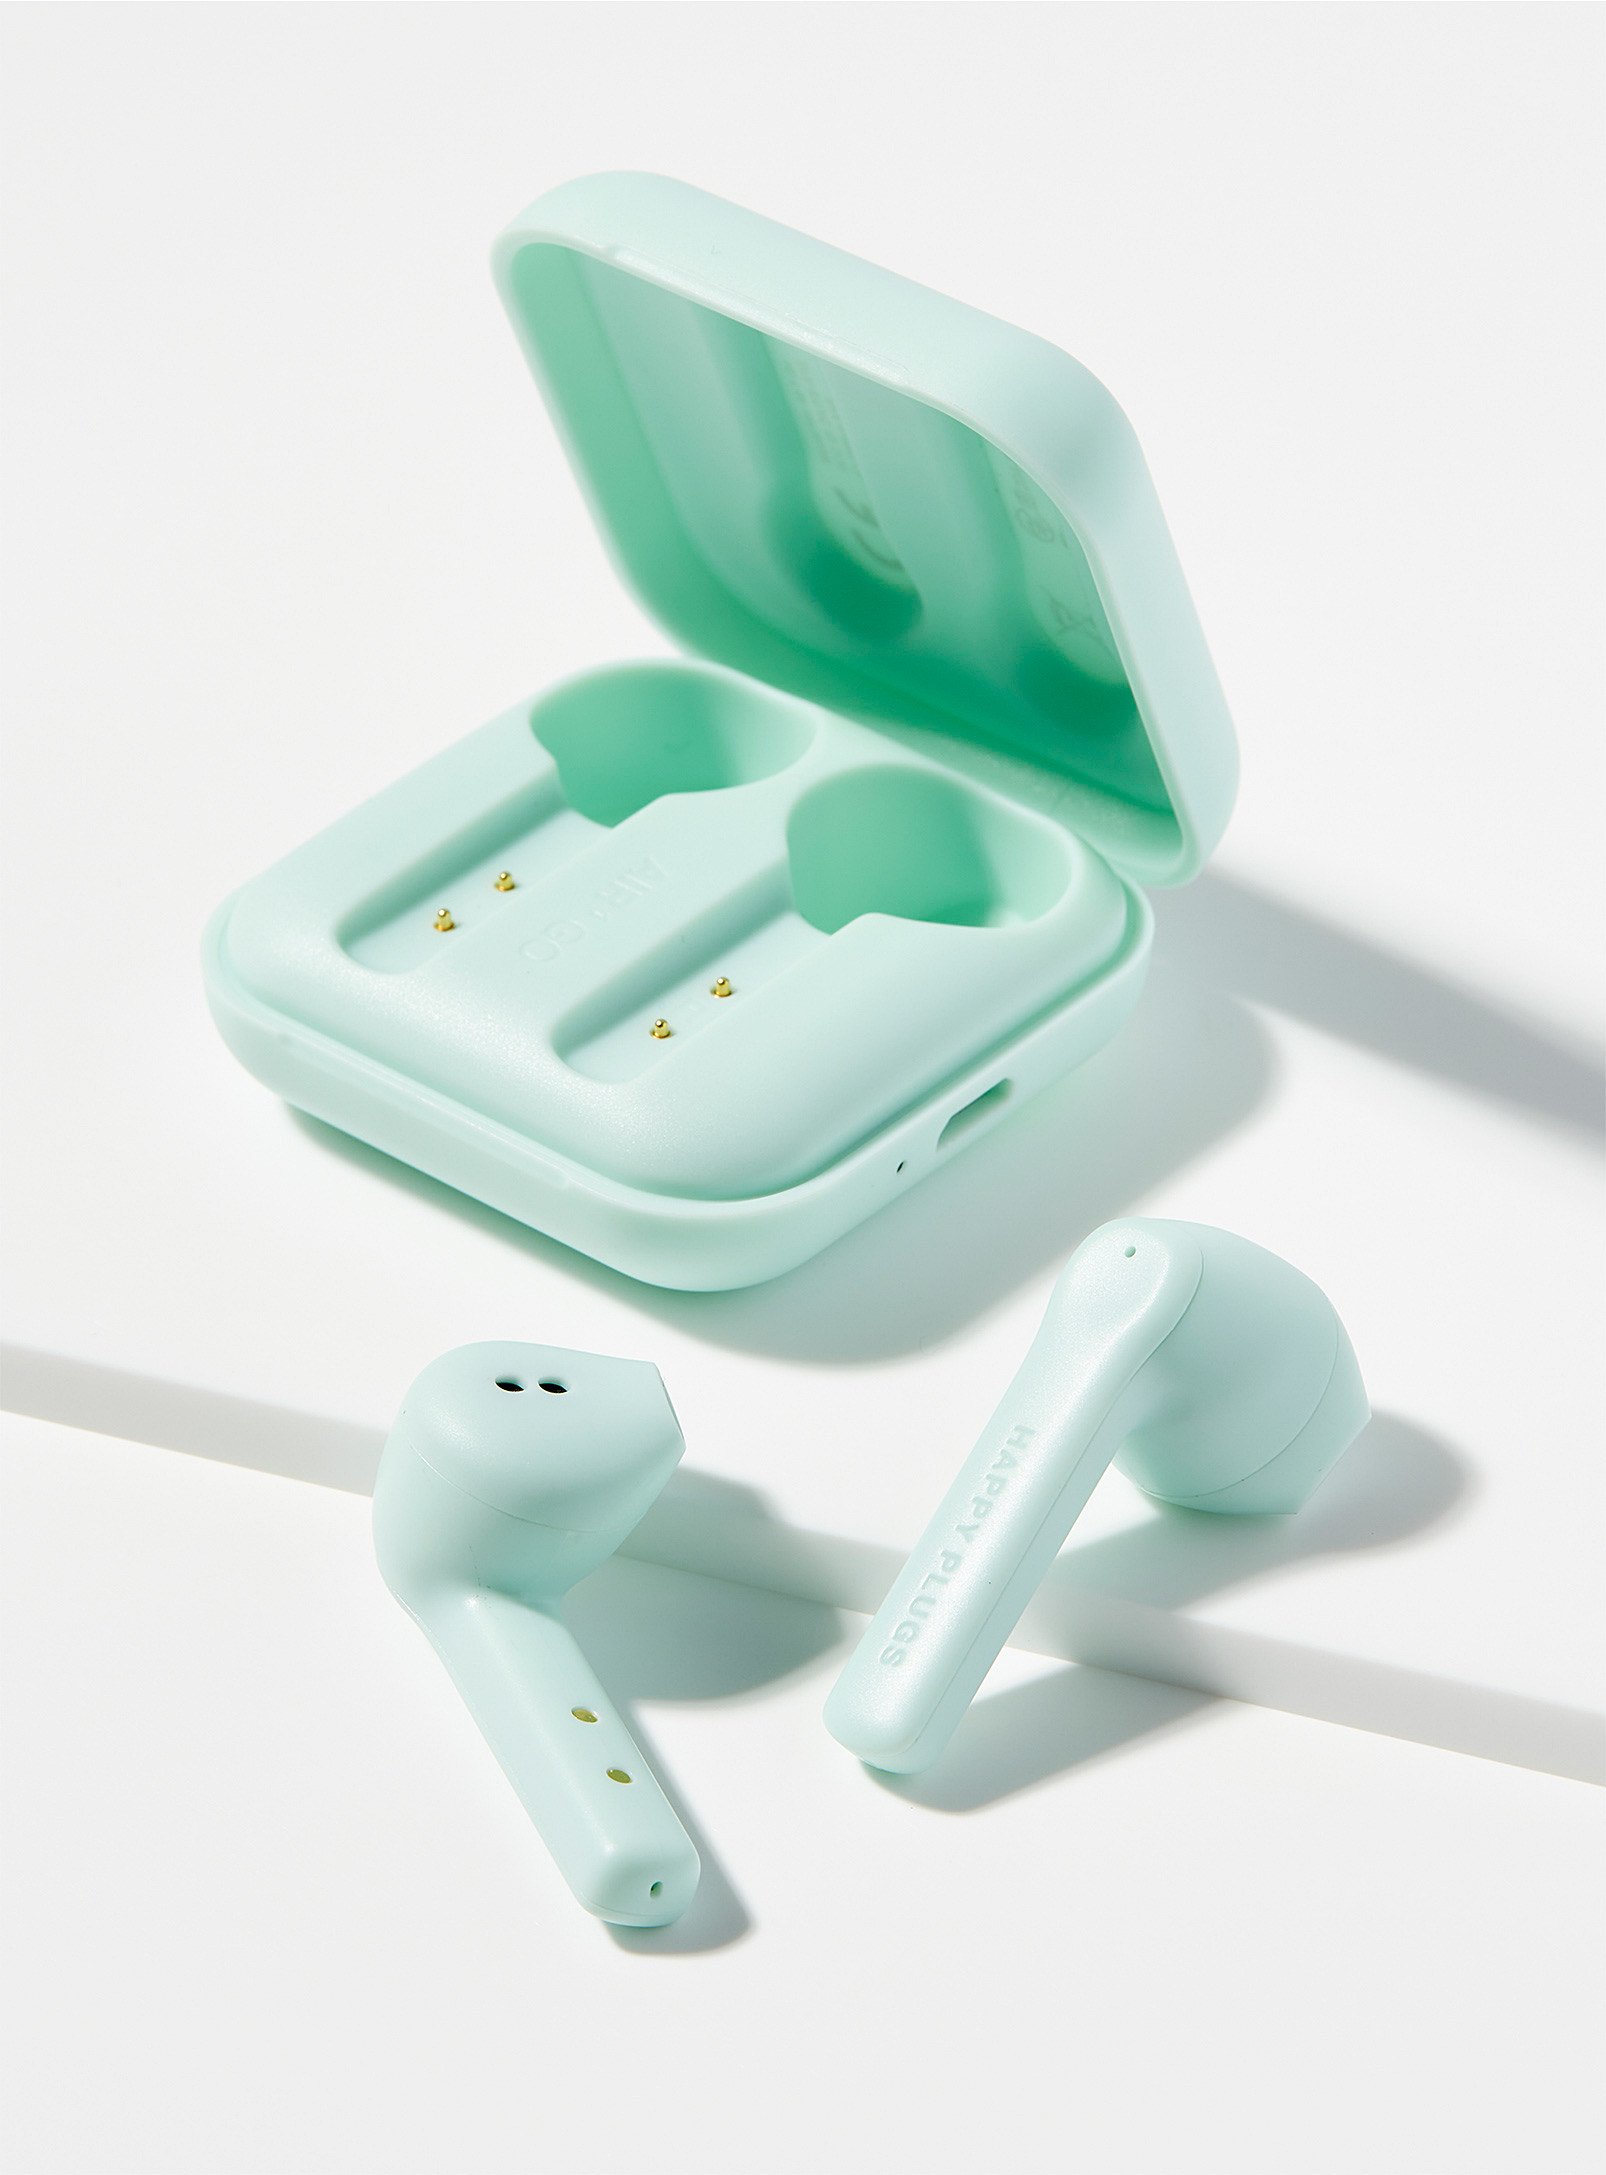 A pair of earpods and a small case beside them